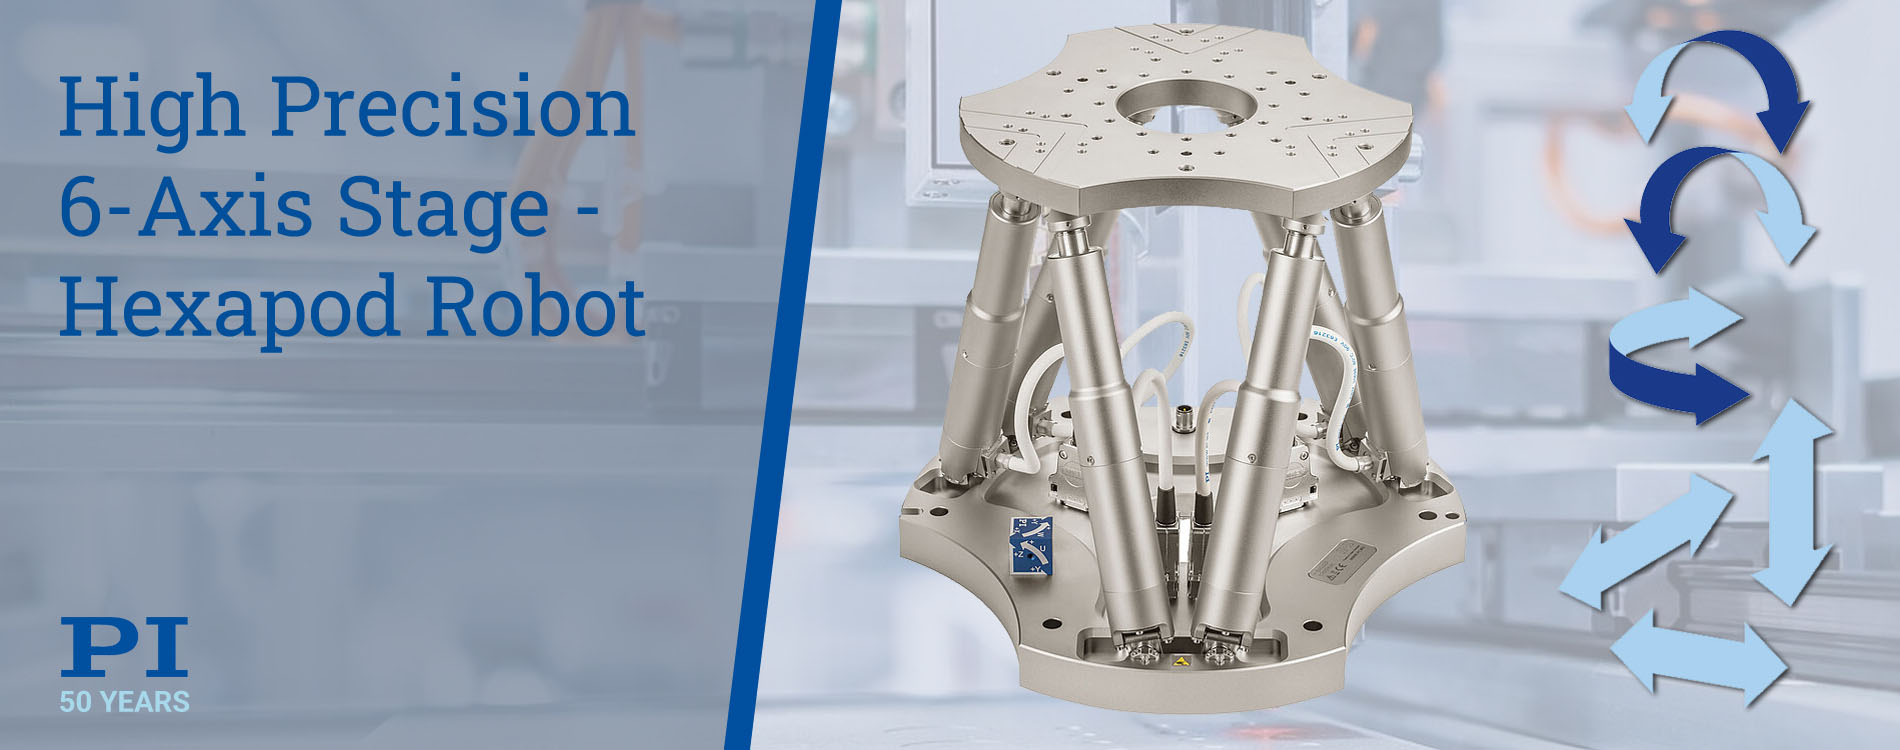 High performance, cost-effective, 6-axis stage based on a Hexapod micropositioning robot for industrial high precision multi-axis motion control and automation applications